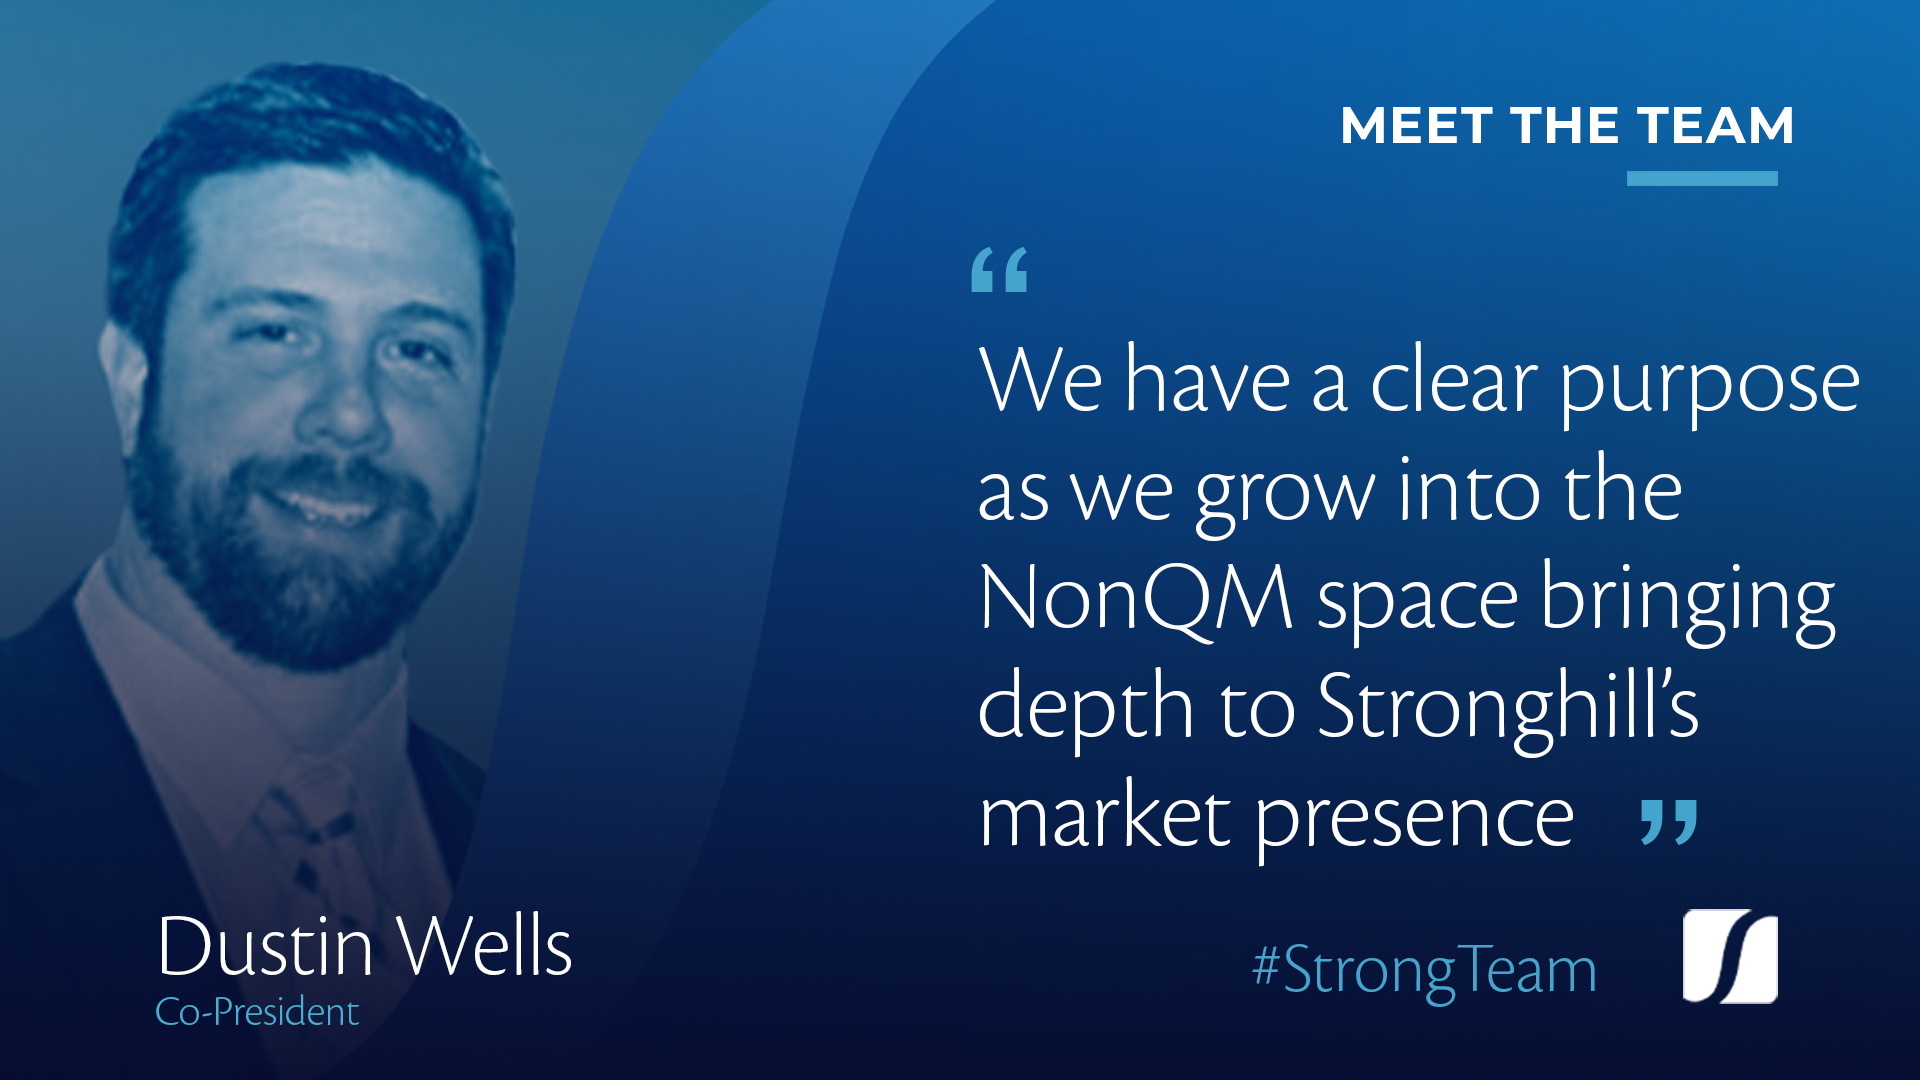 Dustin Wells, Co-President of Stronghill Capital